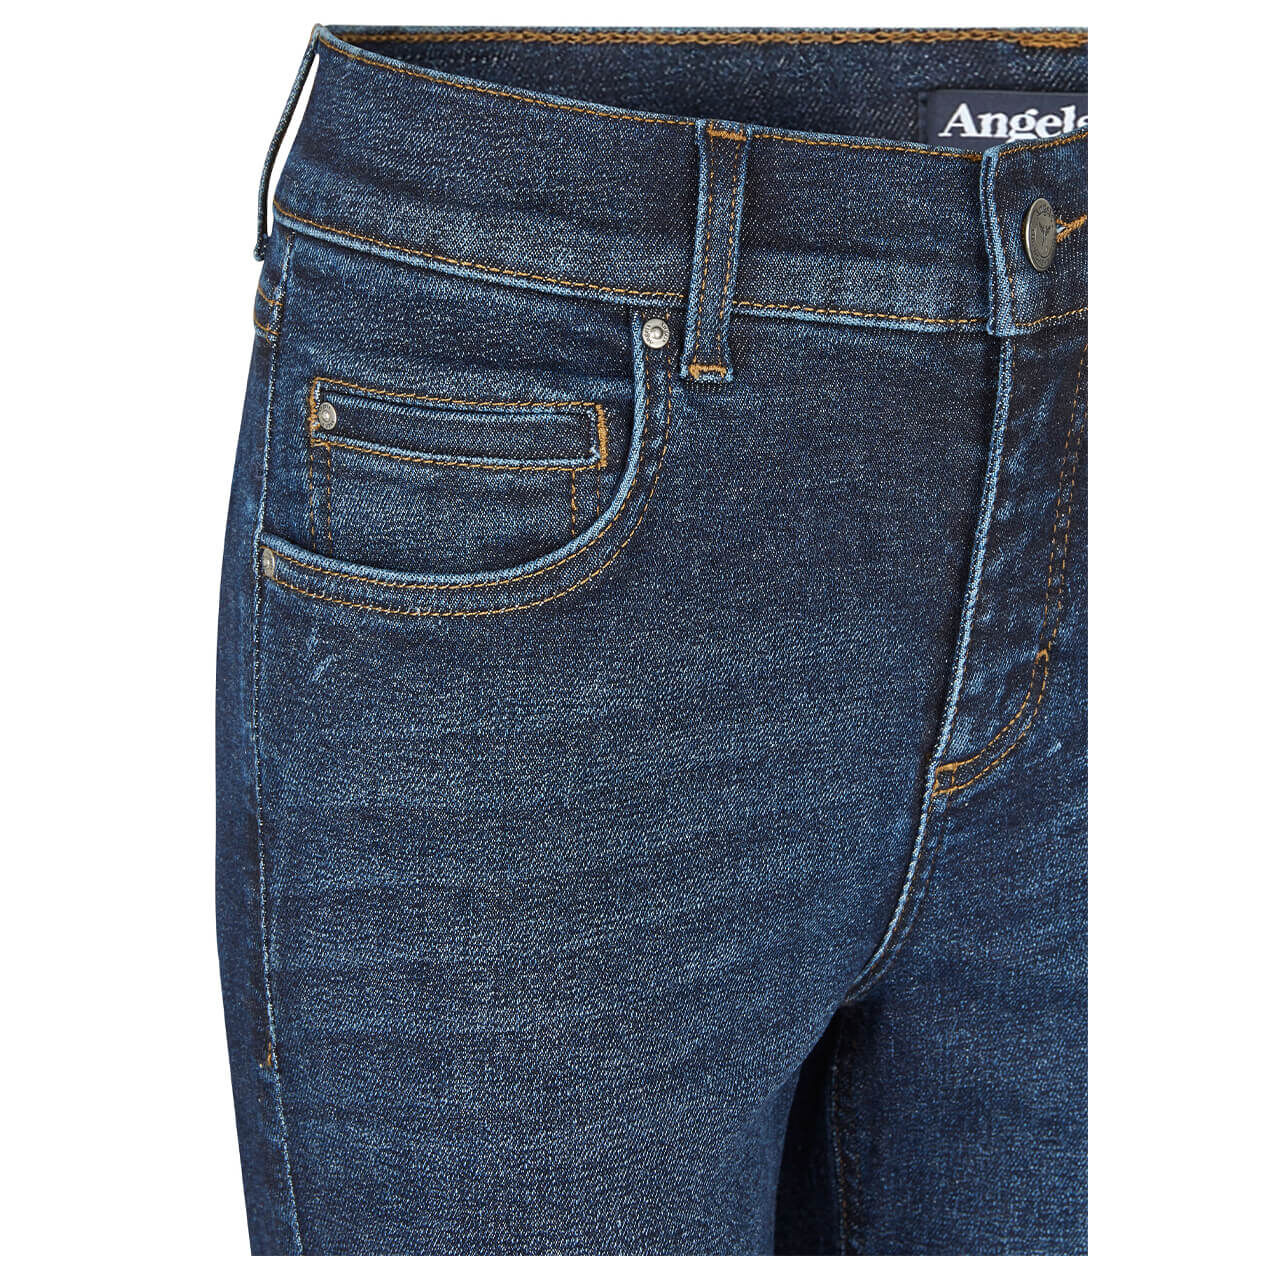 Angels Cici Jeans stone used buffi